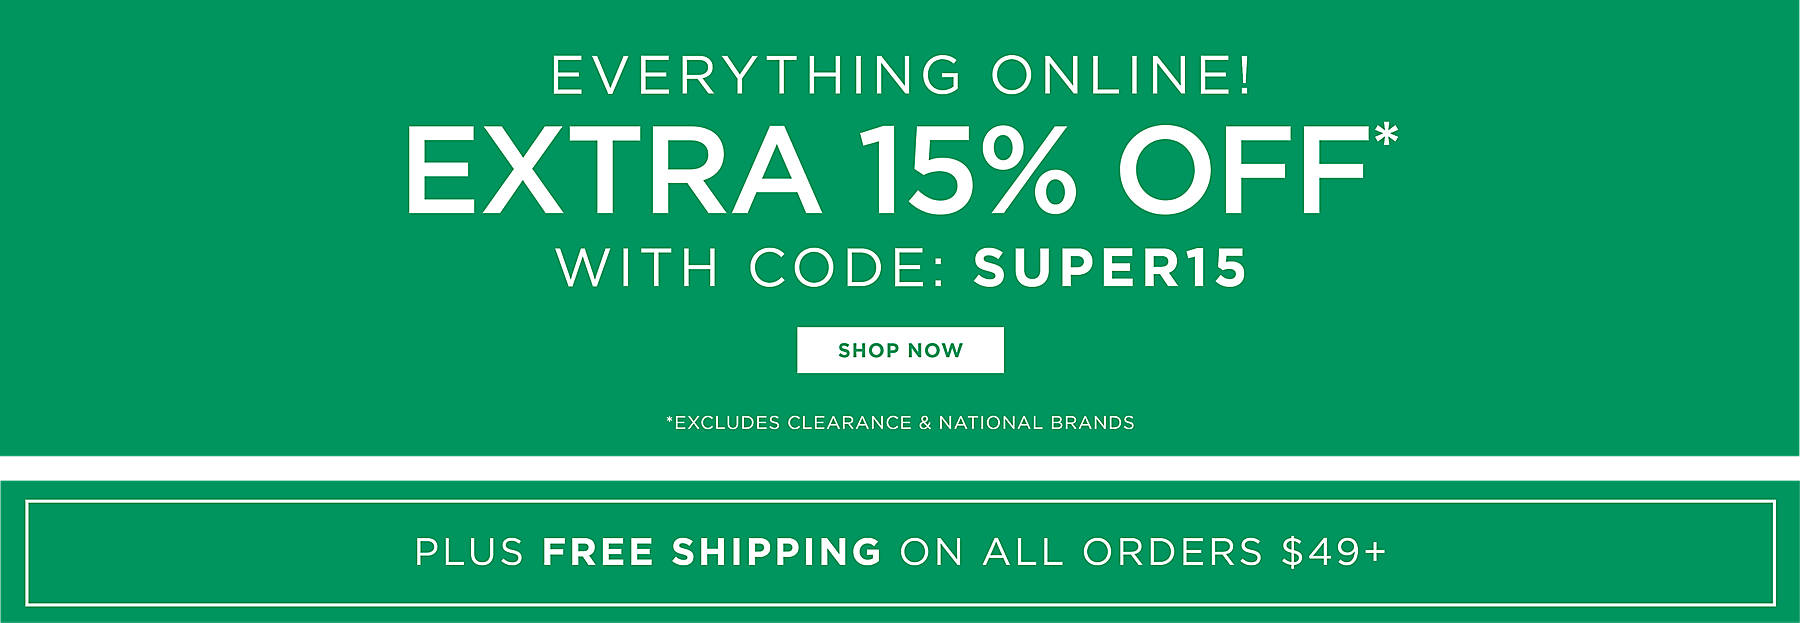 Everything Online! Extra 15% off with code: SUPER15 Shop Now *Excludes Clearance & National Brands Plus Free Shipping on All Orders $49+